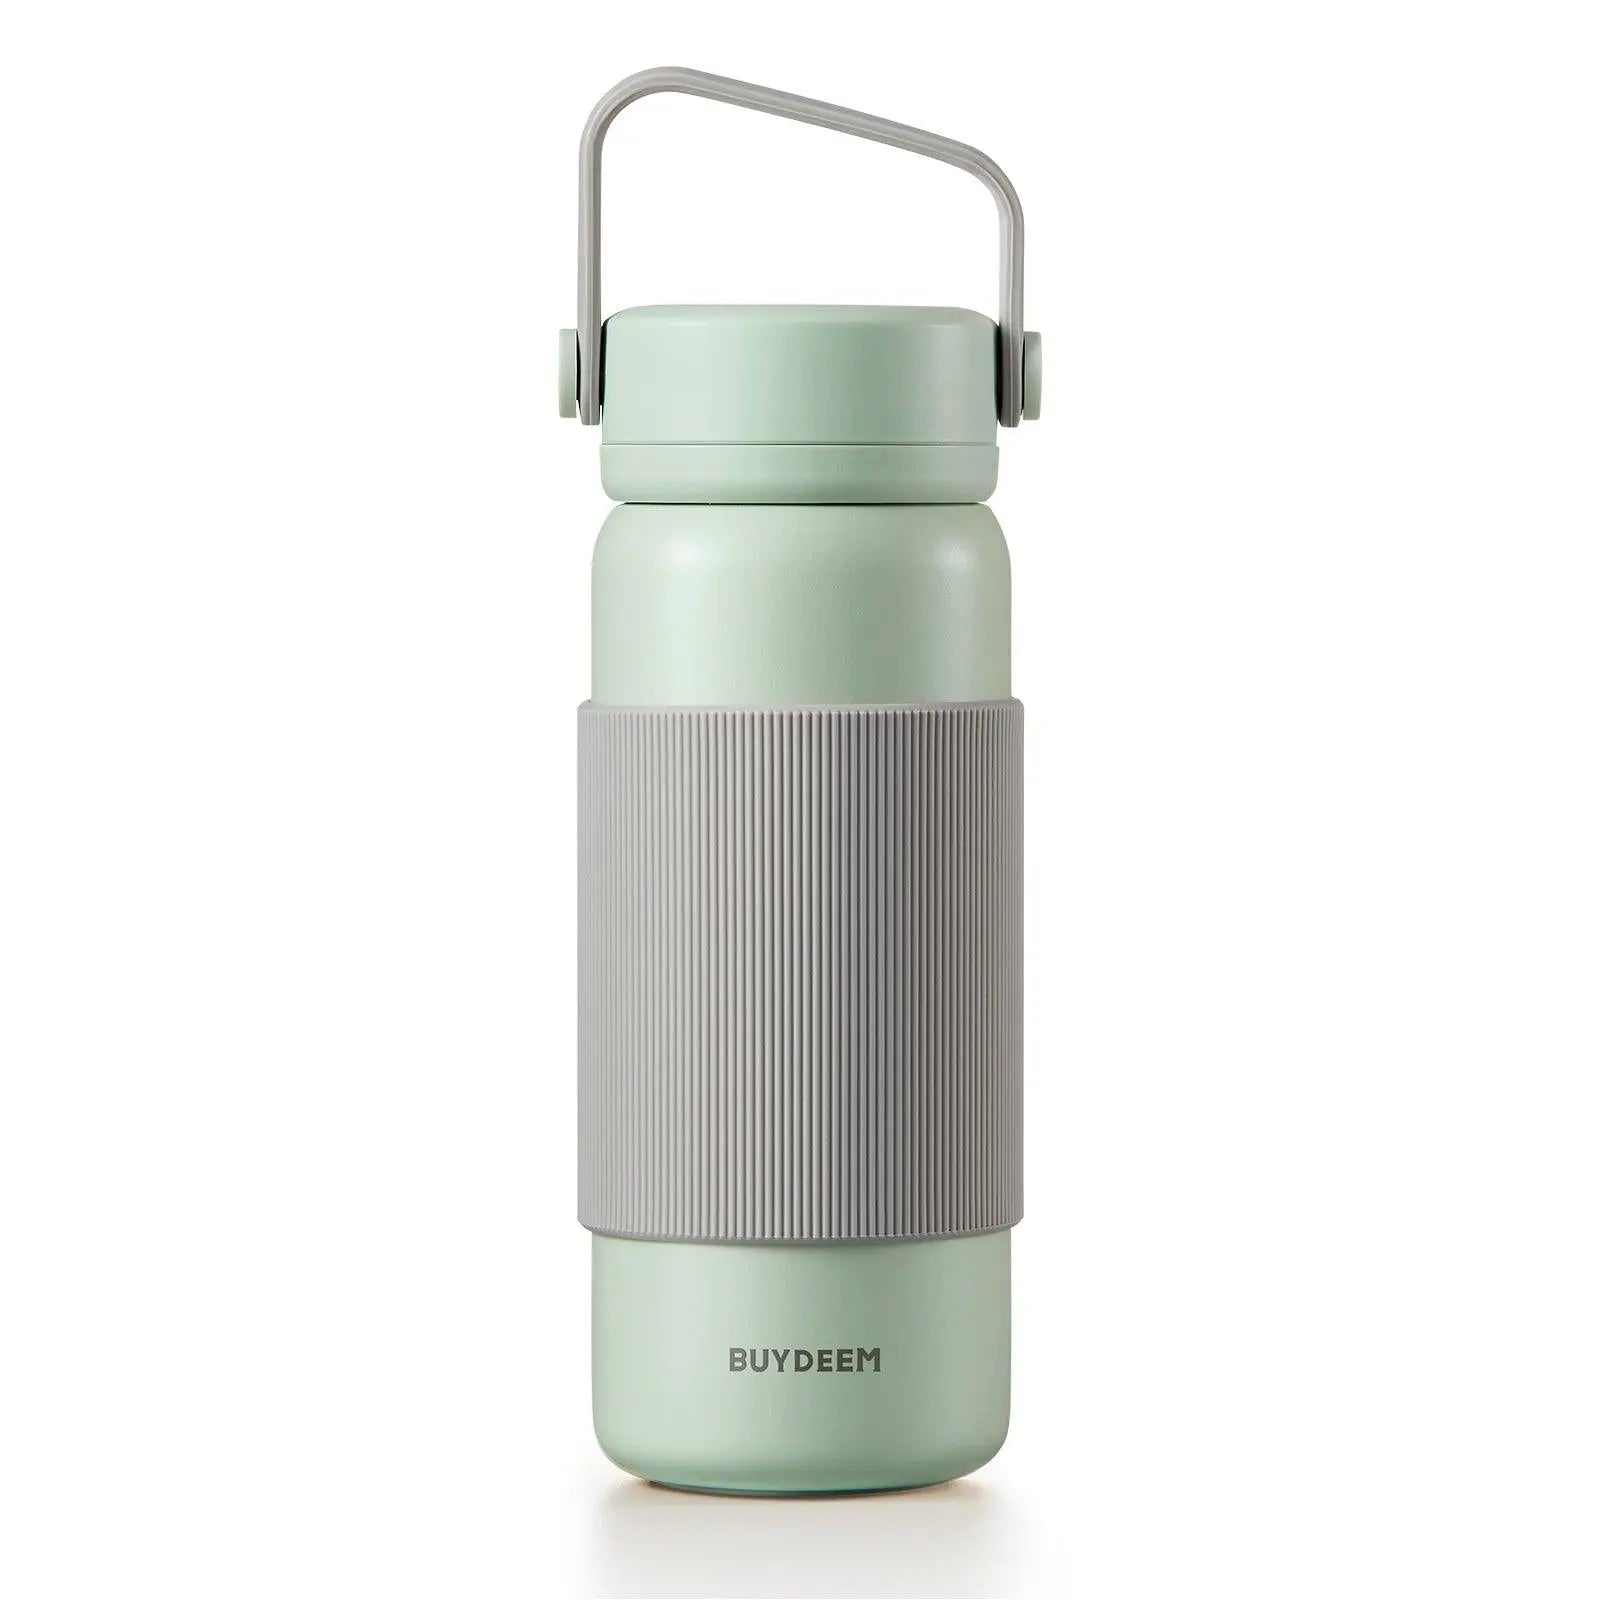 https://us.buydeem.com/cdn/shop/products/BUYDEEM-CD1011-Stainless-Steel-Thermos-Tea-Bottle-with-Removable-Infuser-BuydeemUS-1657519703.jpg?v=1701918786